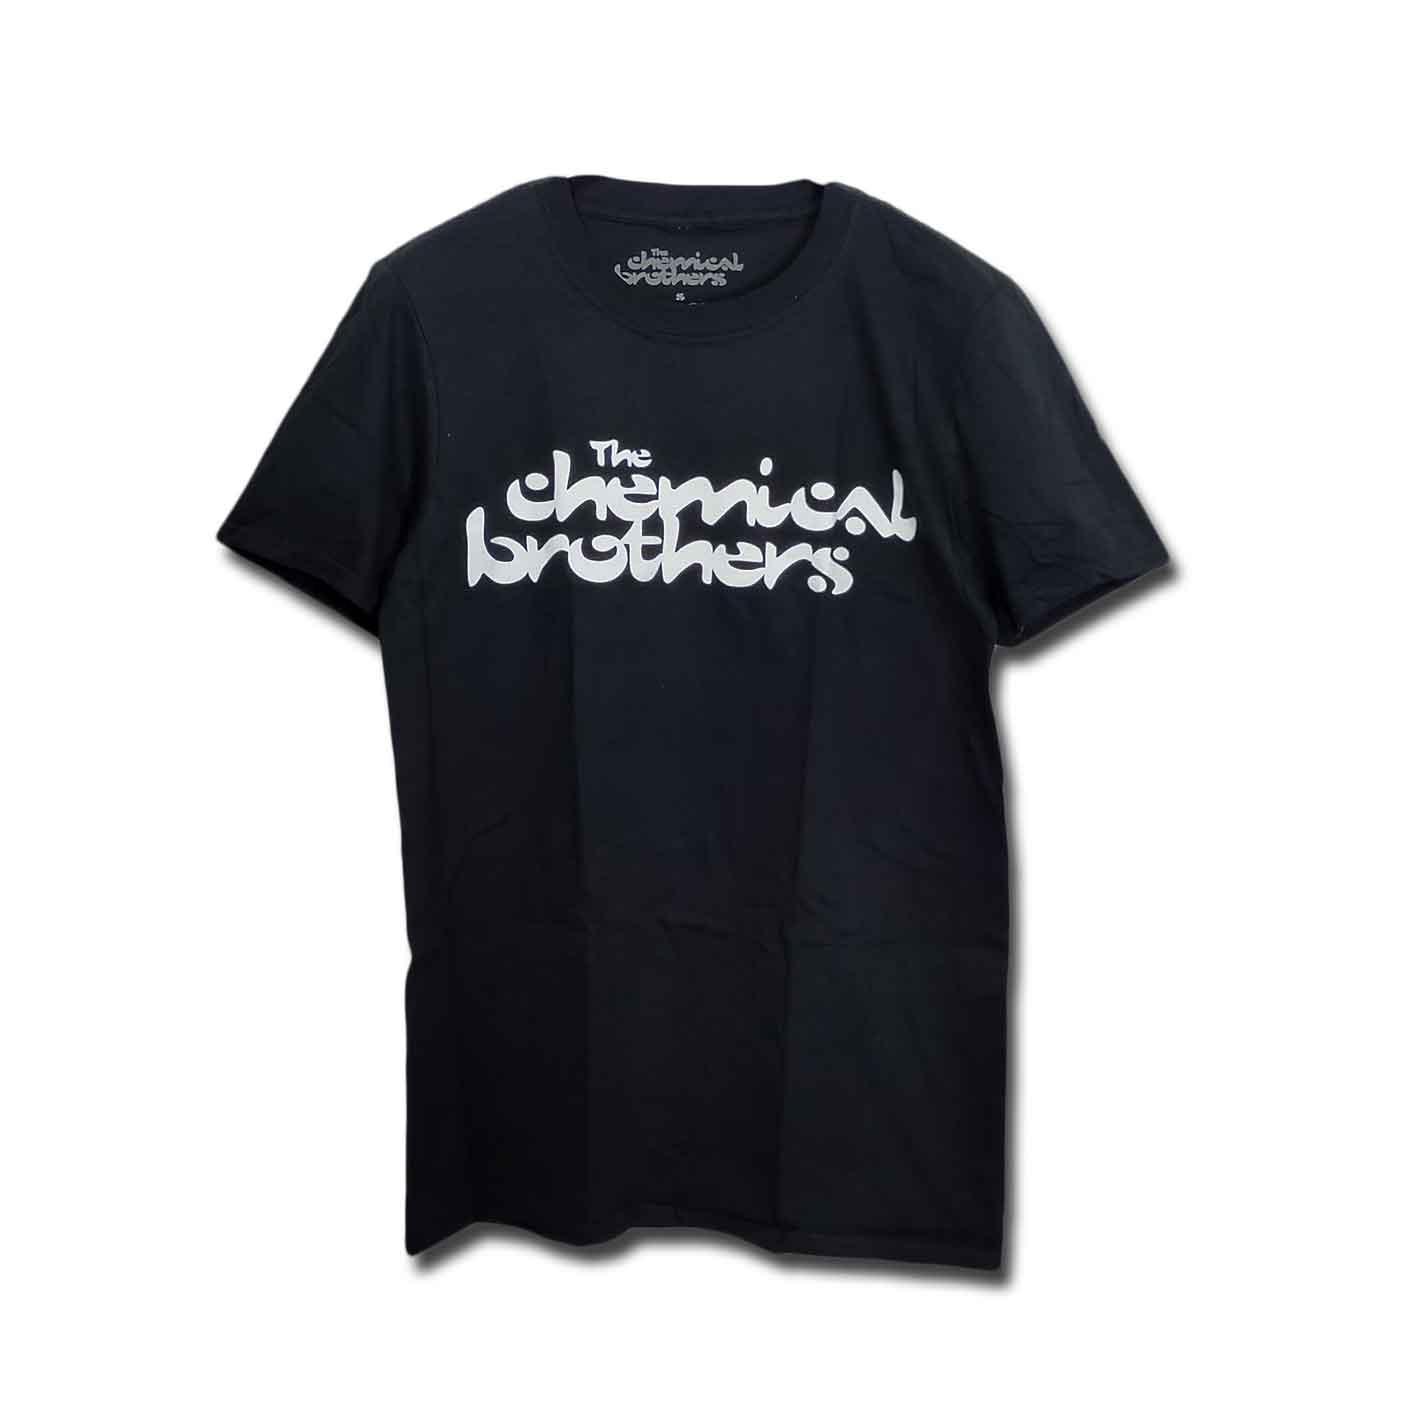 The Chemical Brothers/Tシャツ